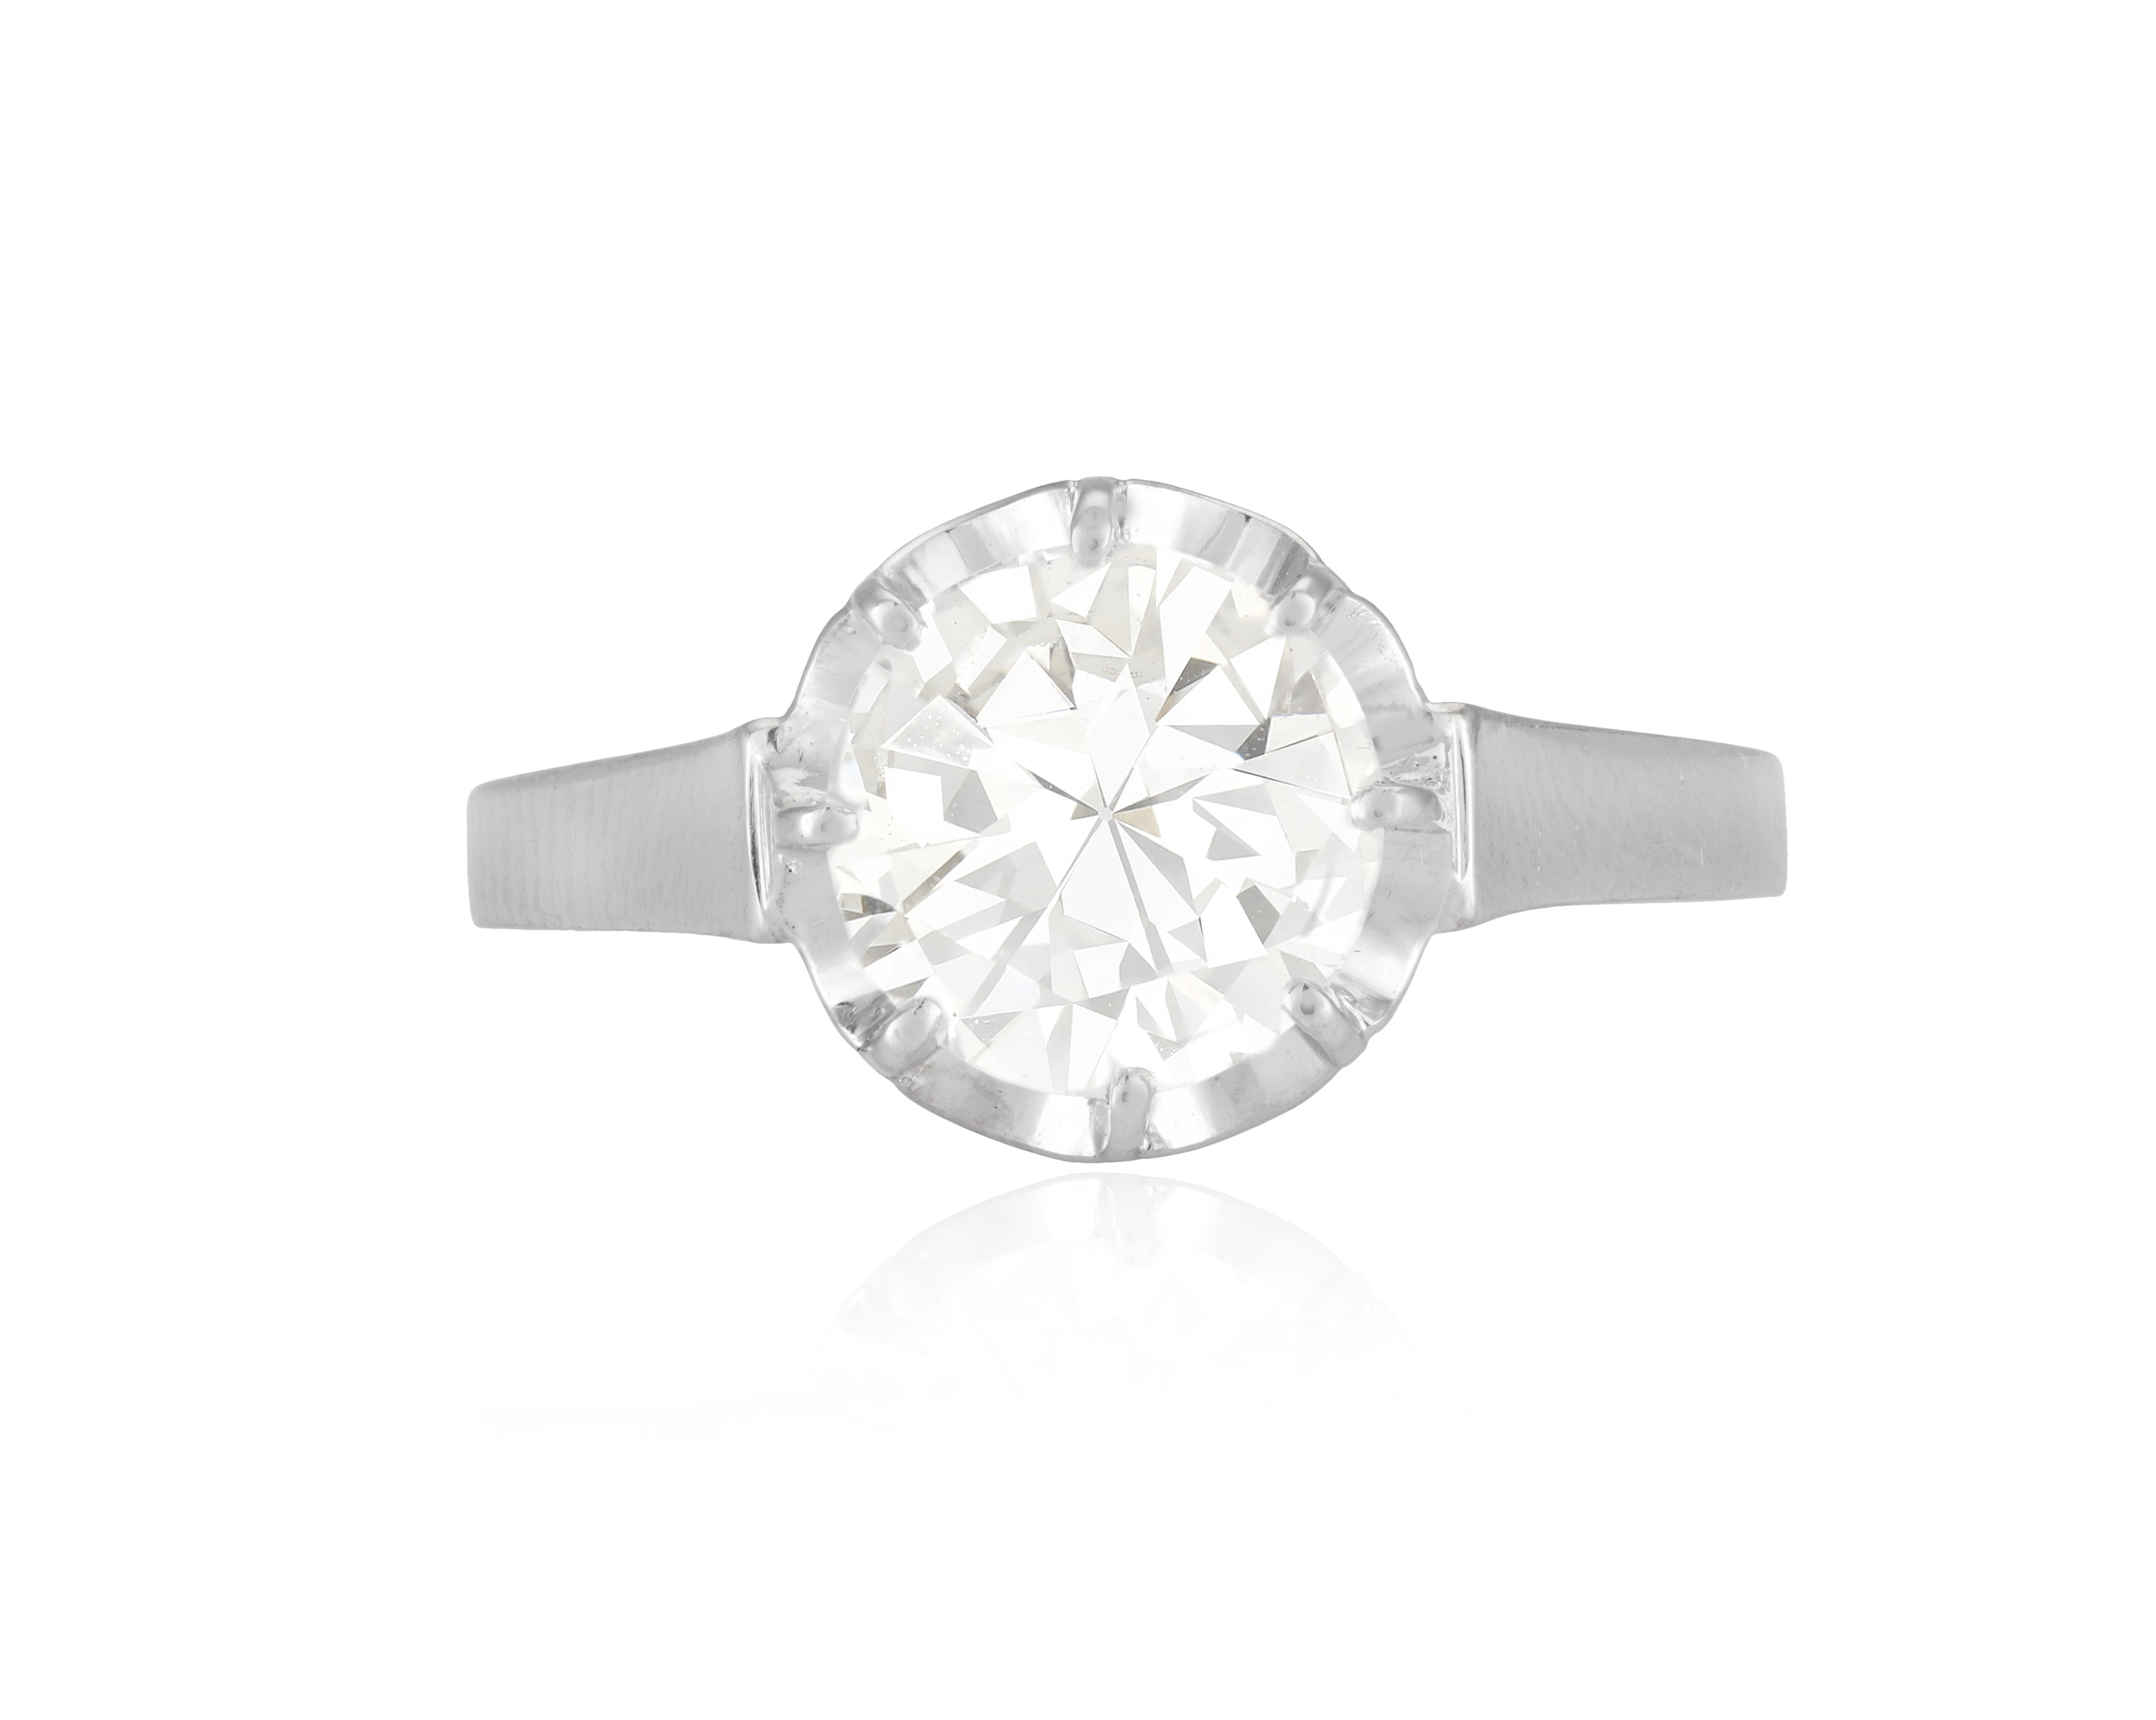 A DIAMOND SINGLE-STONE RING, CIRCA 1960 The European-cut diamond weighing approximately 1.75cts - Image 2 of 5